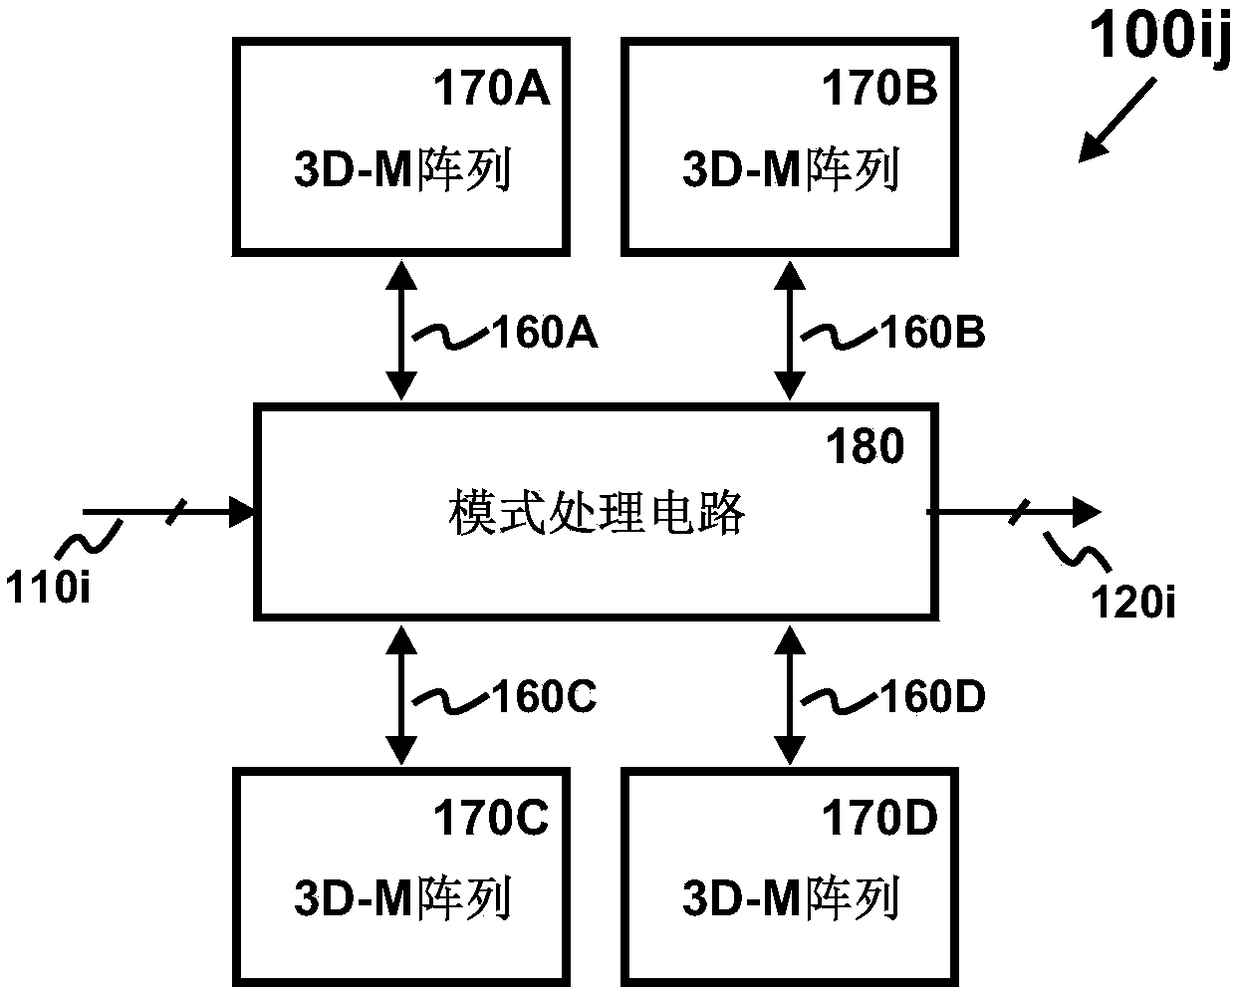 Memory with image recognition function